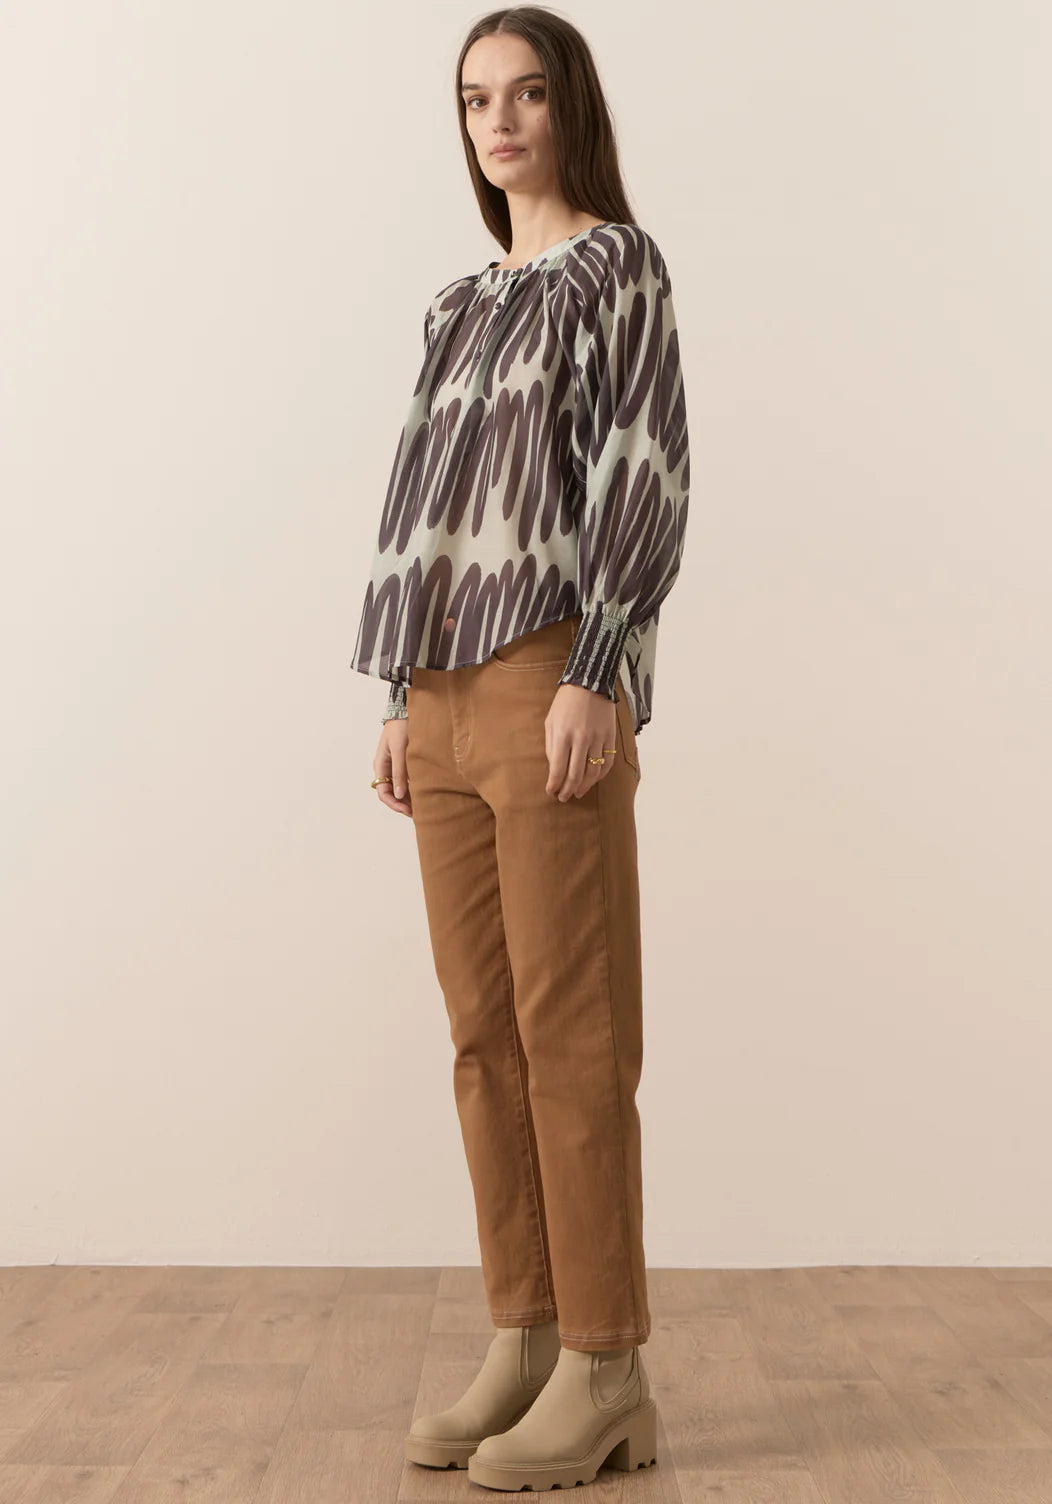 Pol Quill Top - Quill Print